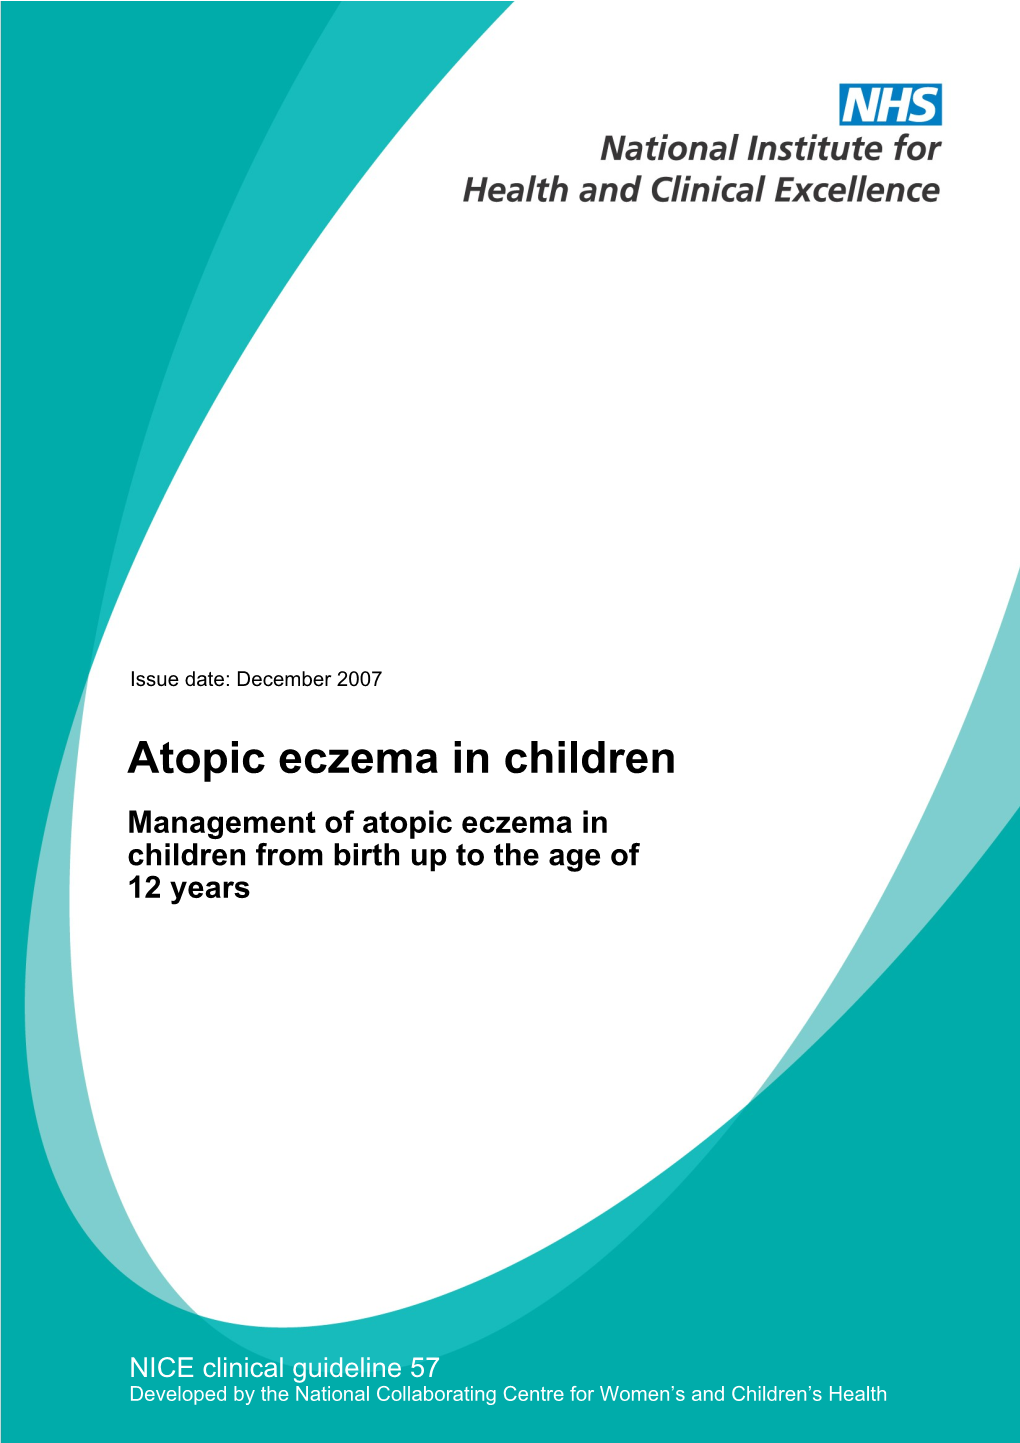 Atopic Eczema in Children: Management of Atopic Eczema in Children from Birth up to The